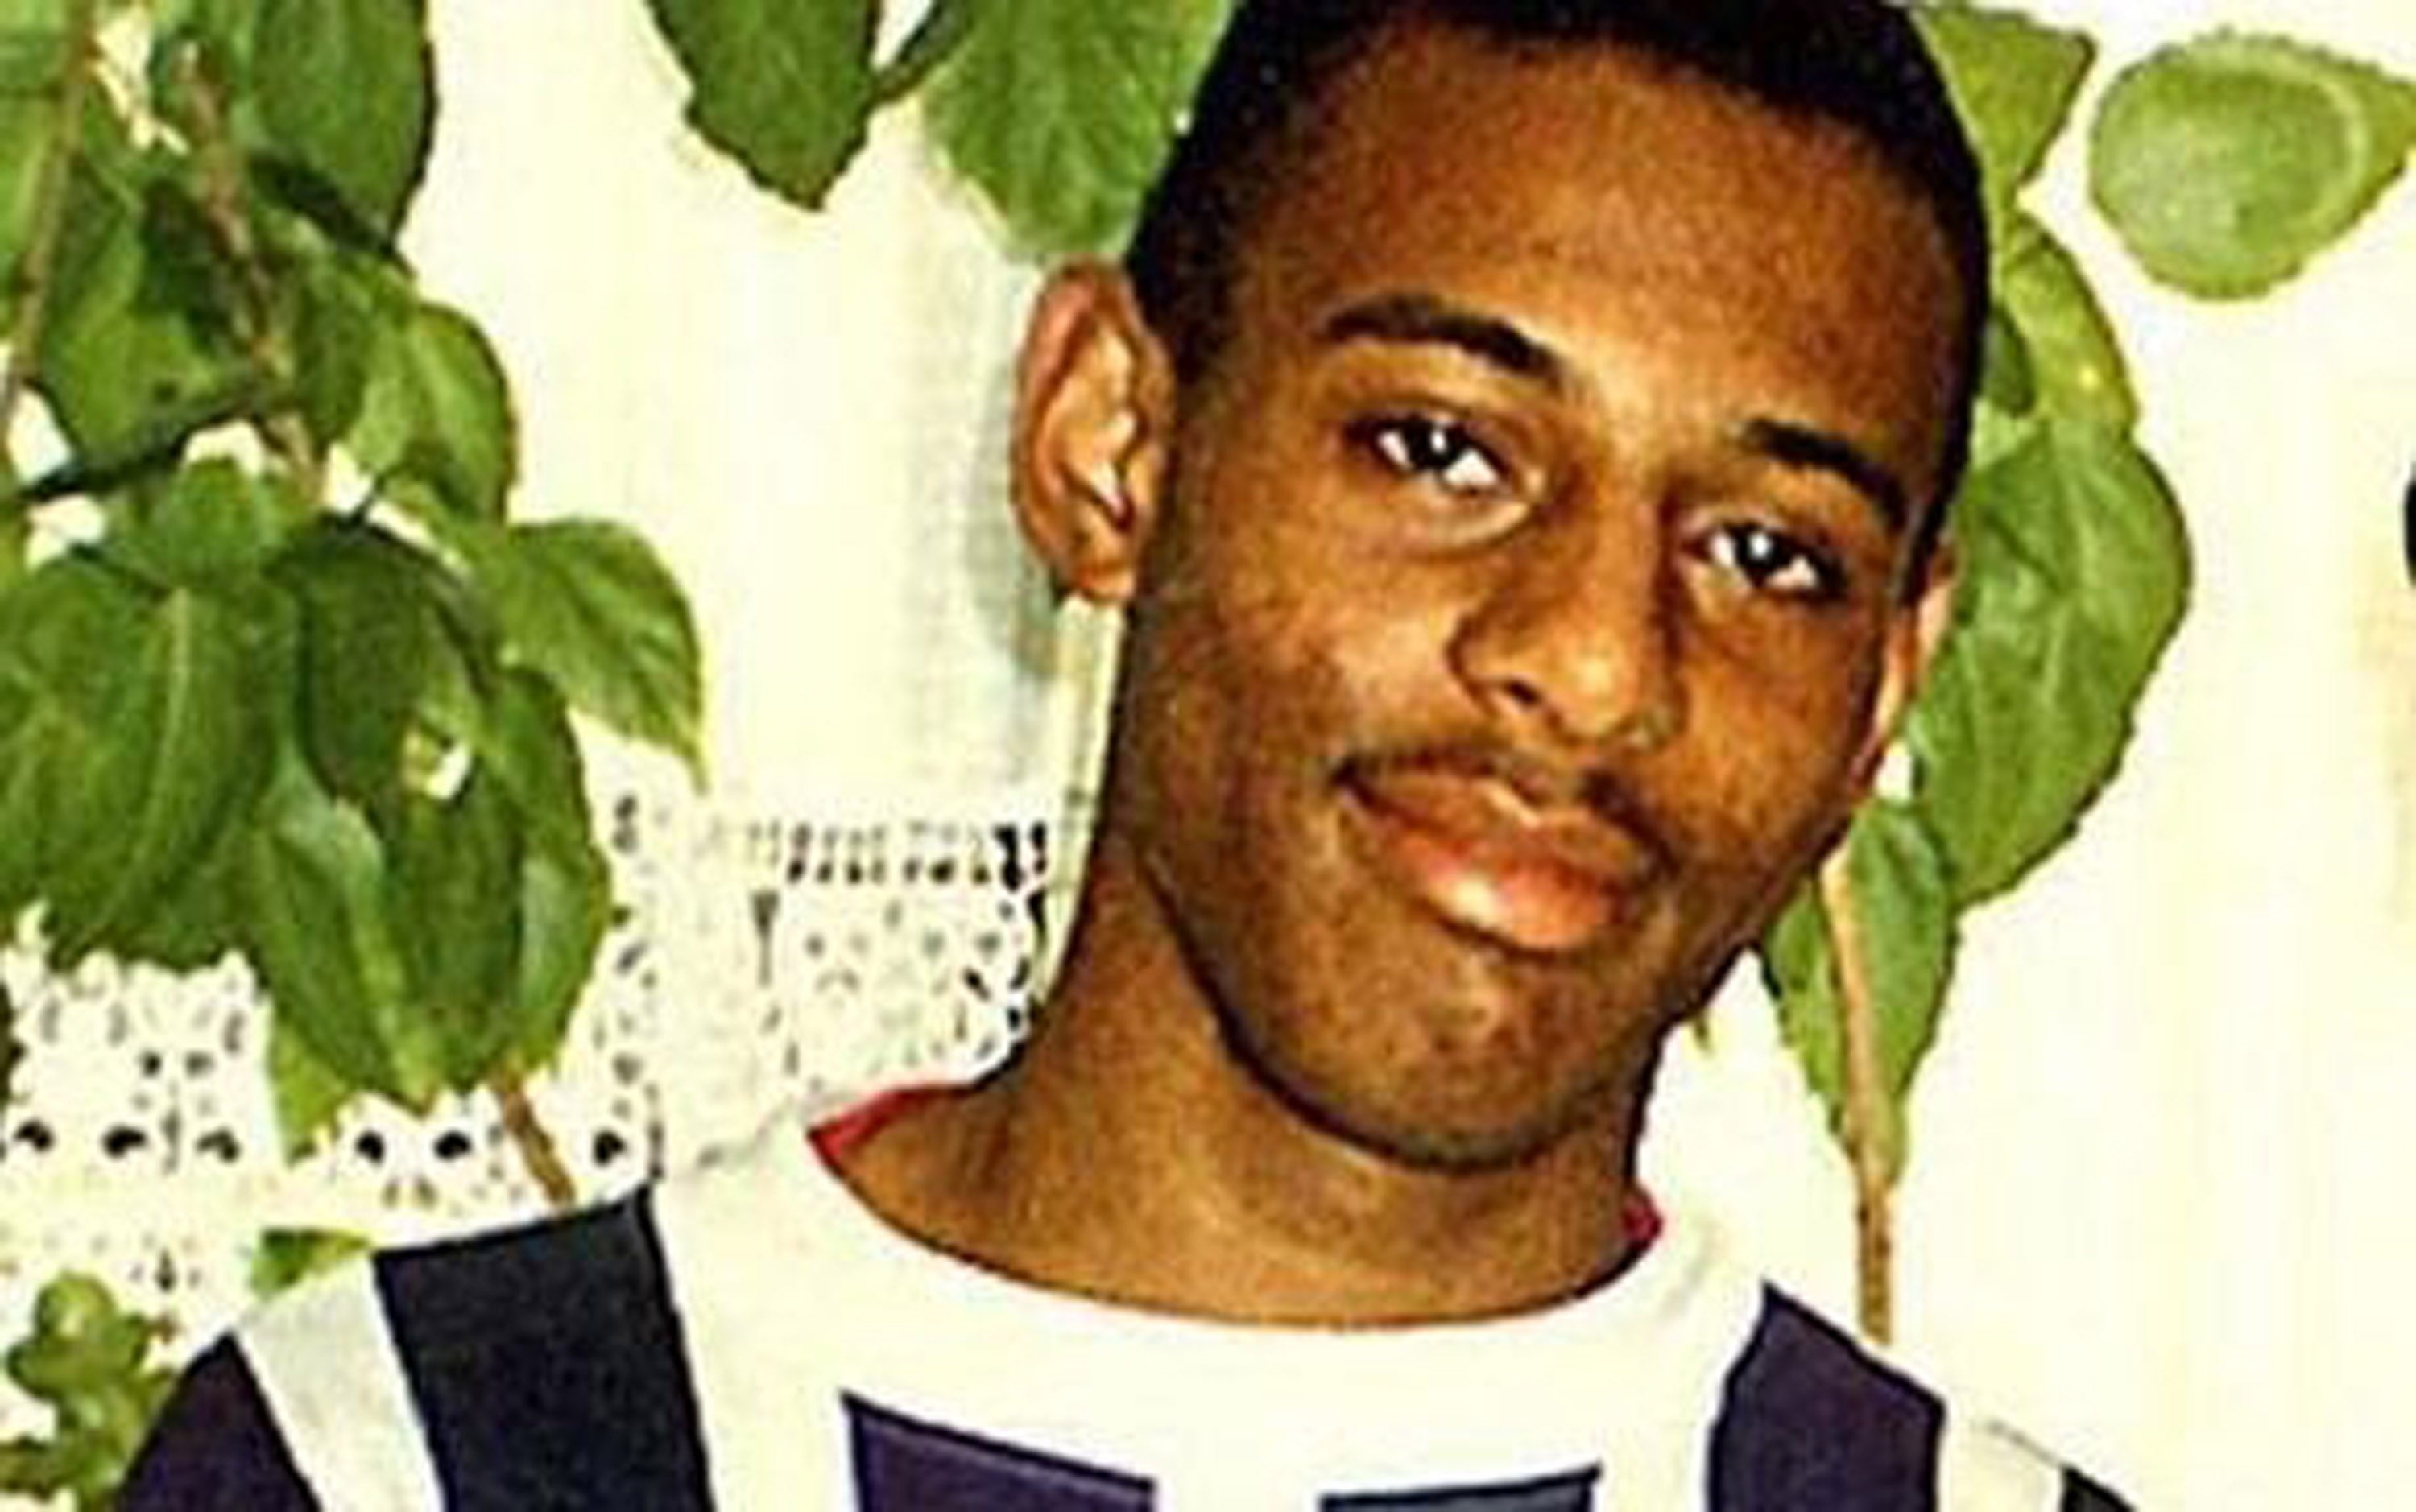 Stephen Lawrence was the victim of a racist murder in 1993